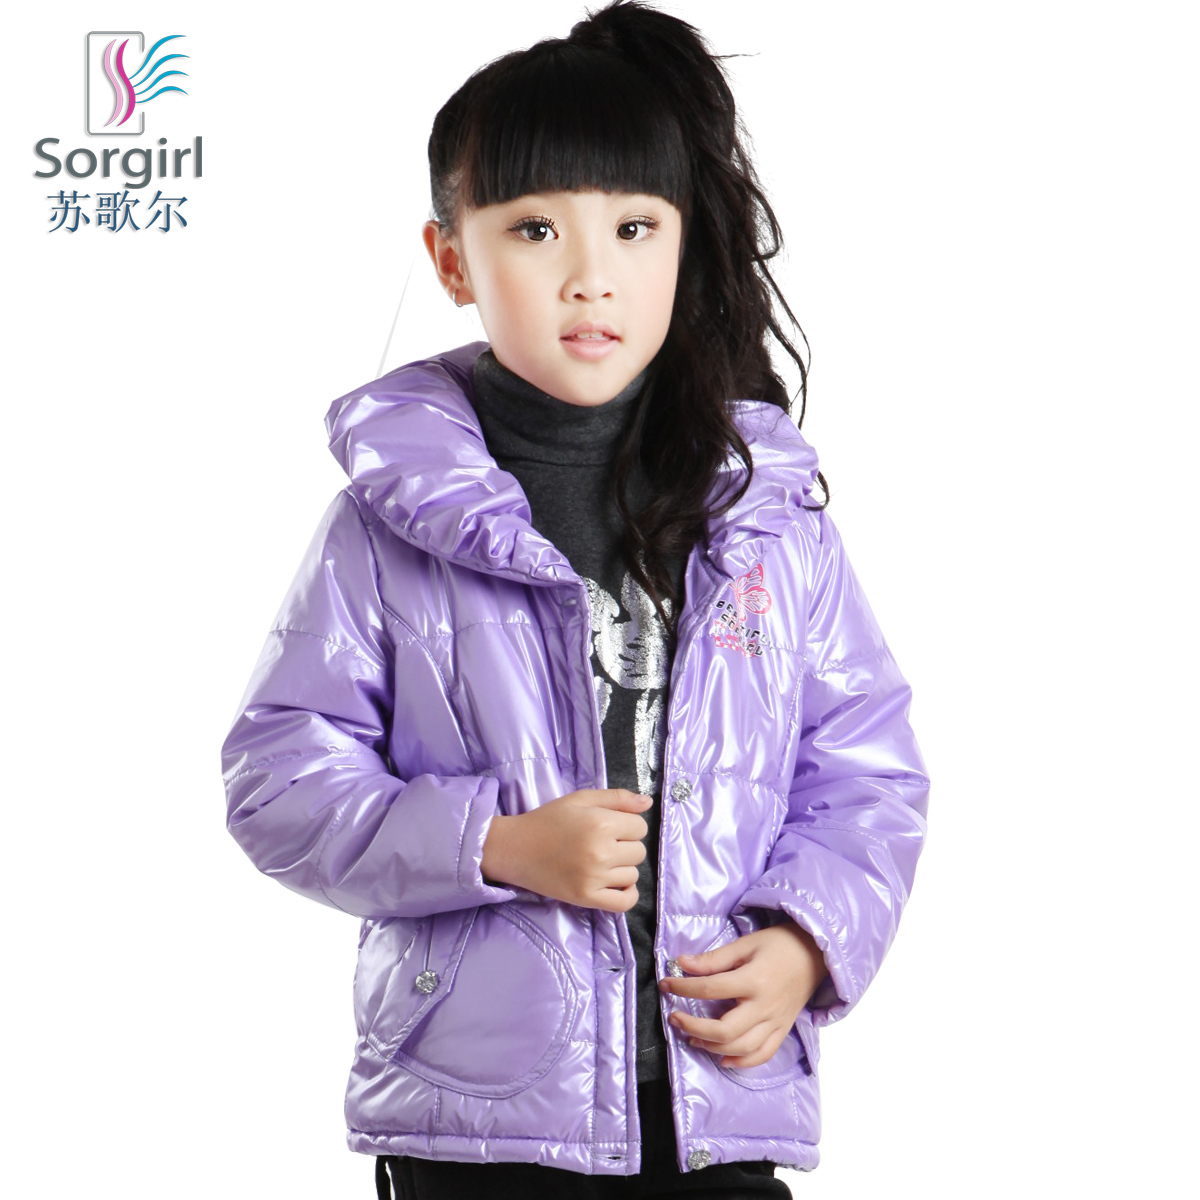 Children's clothing cotton-padded jacket female child cotton-padded jacket thermal plus velvet outerwear thickening